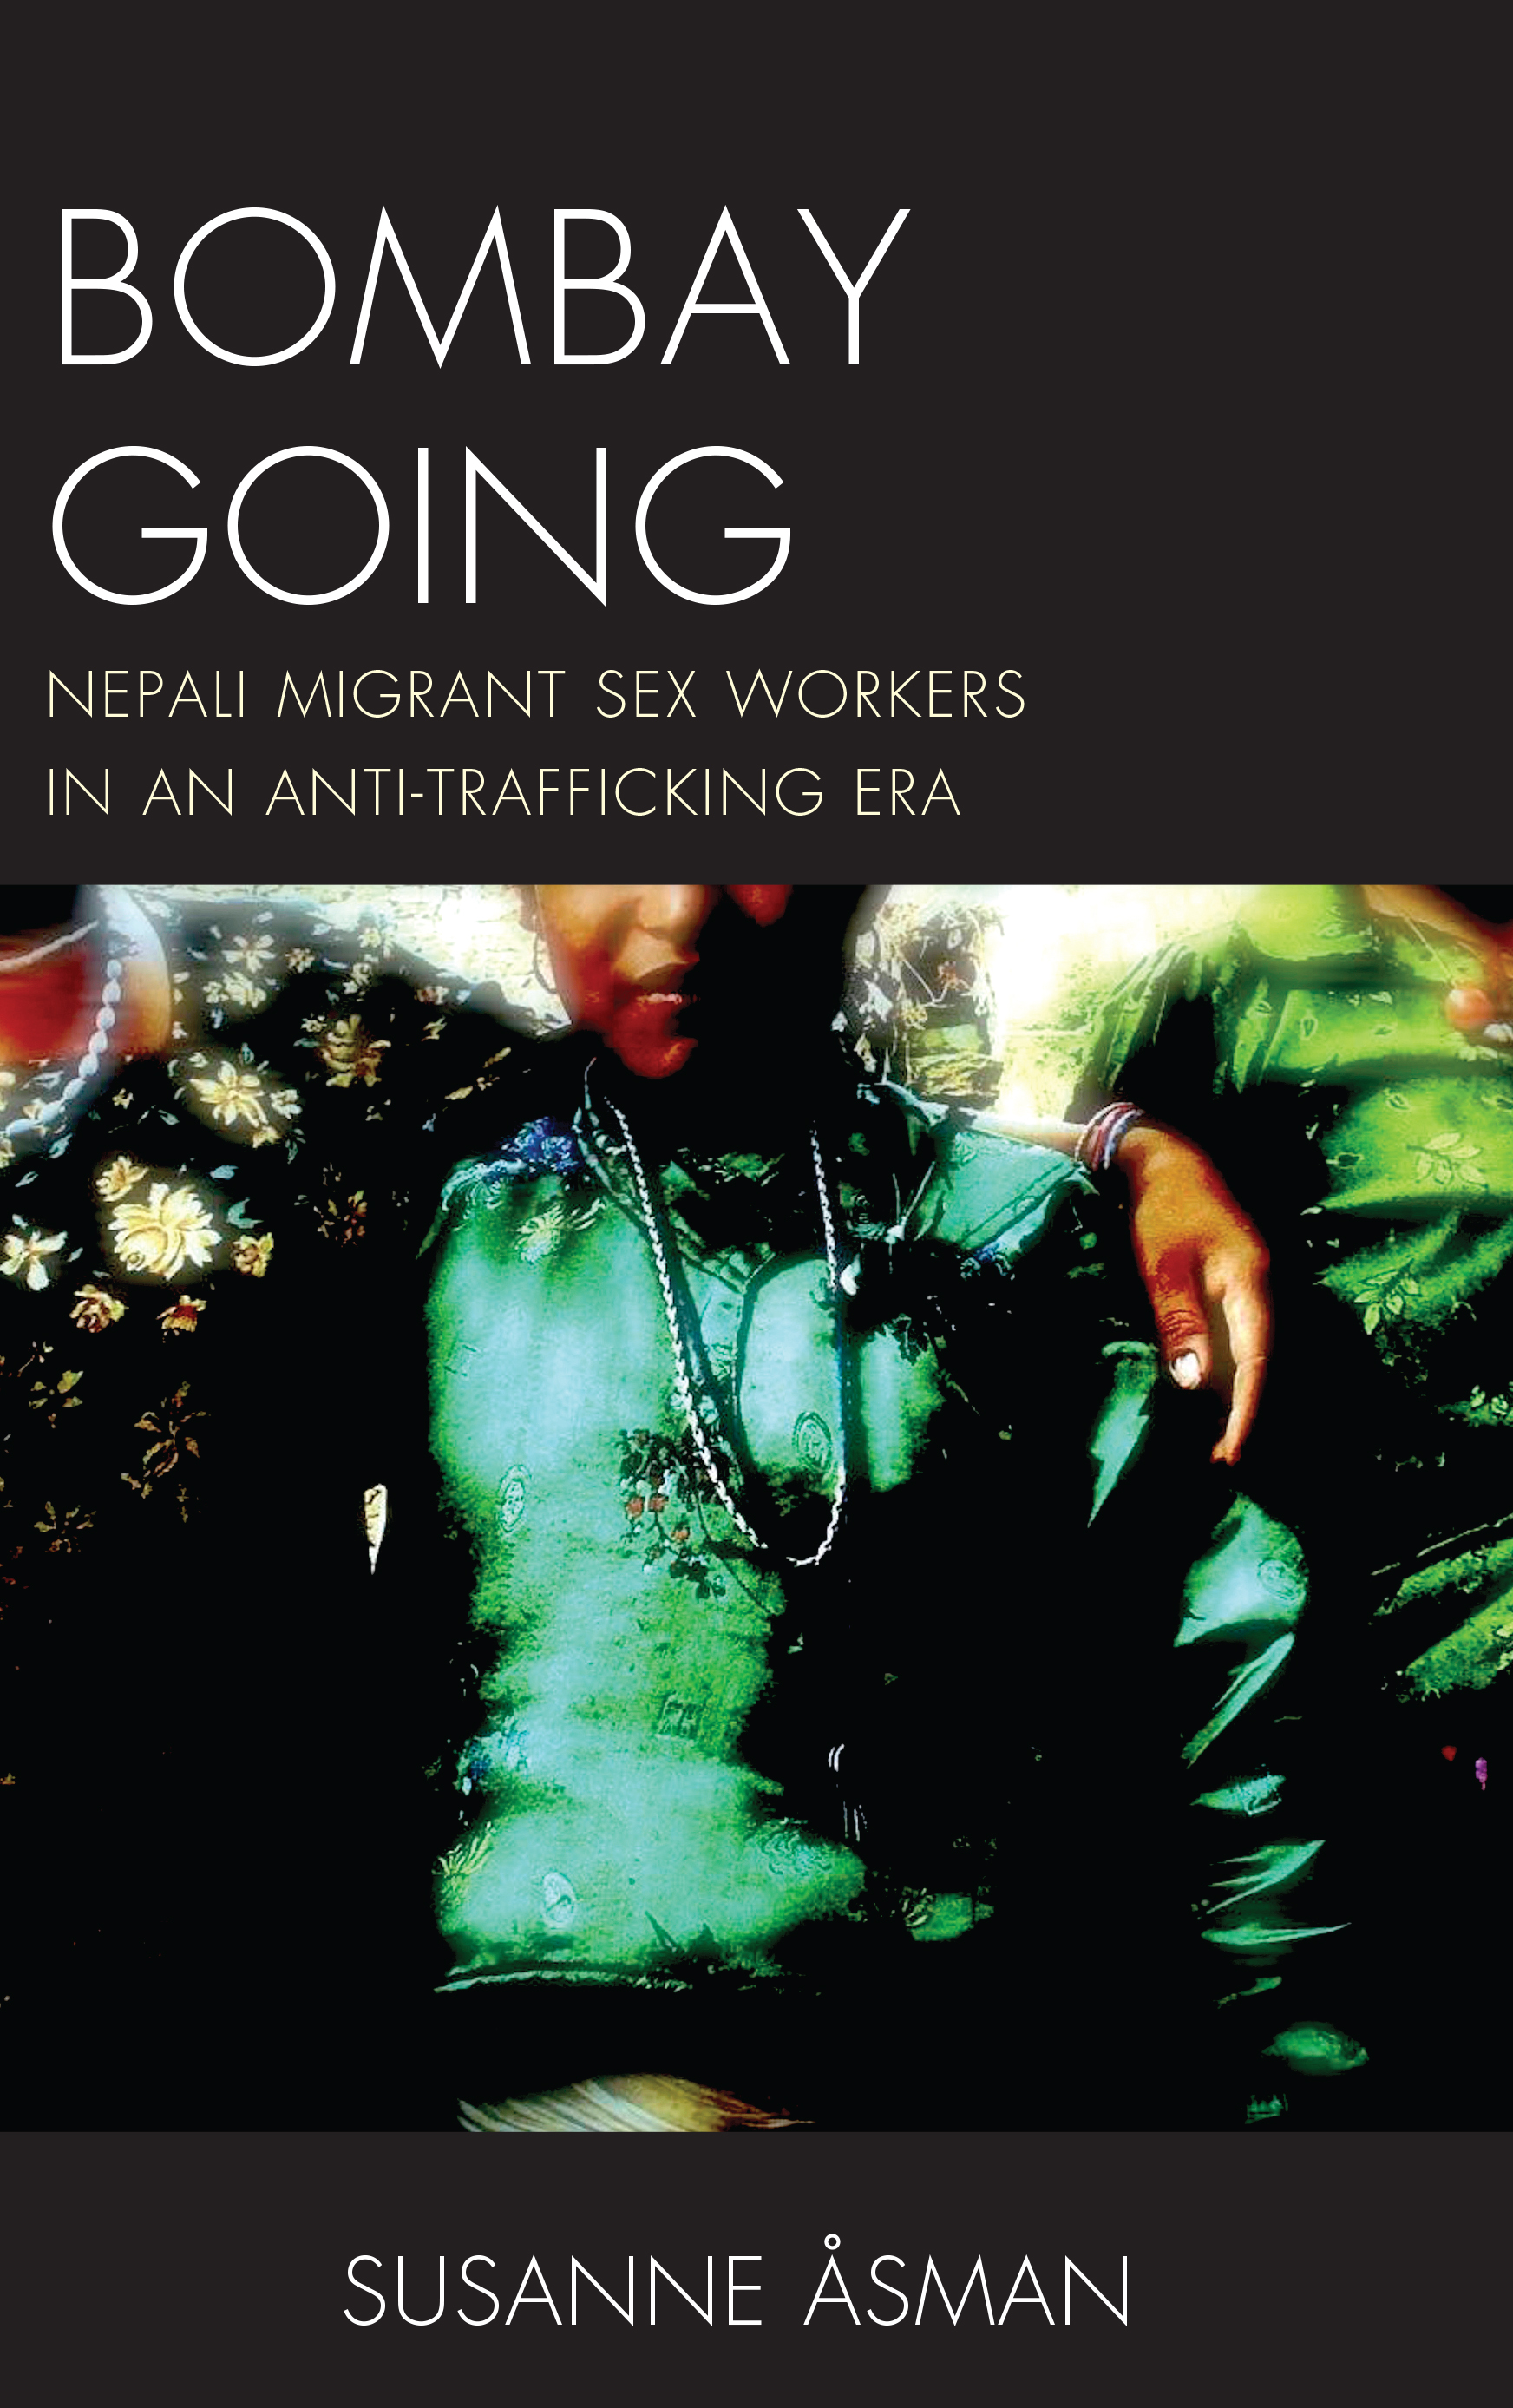 Bombay Going: Nepali Migrant Sex Workers in an Anti-Trafficking Era